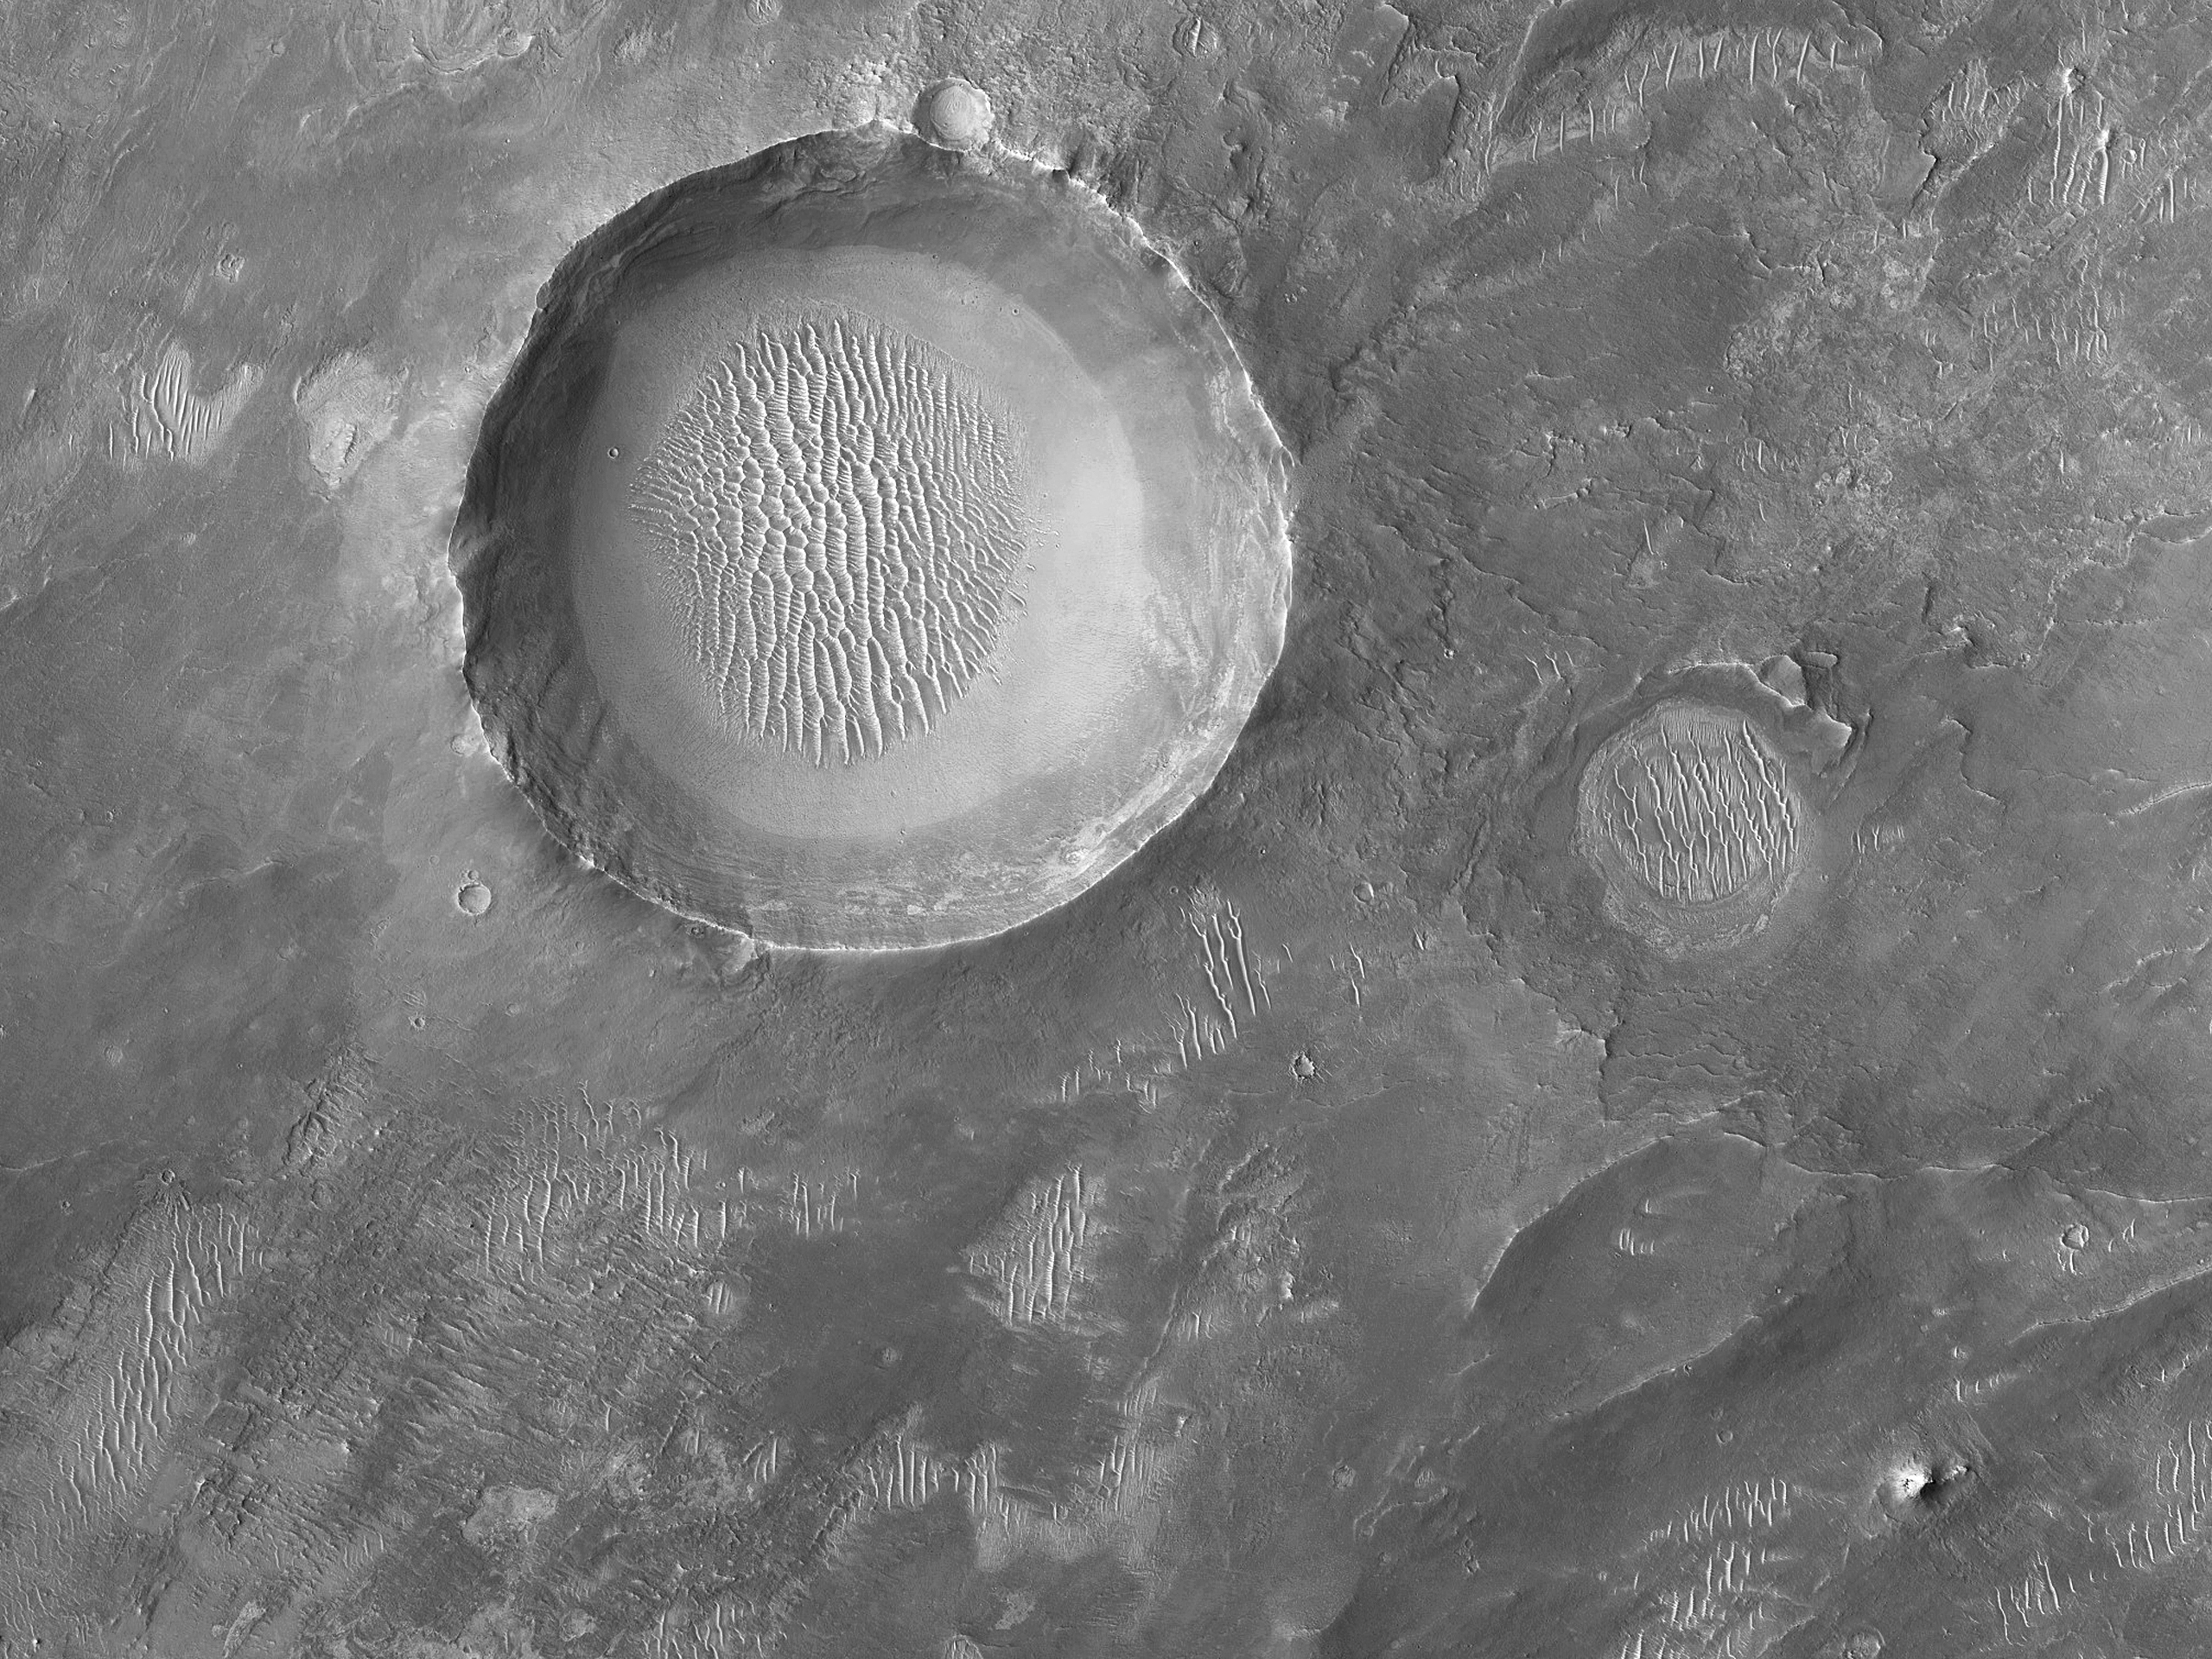 Craters within a Crater